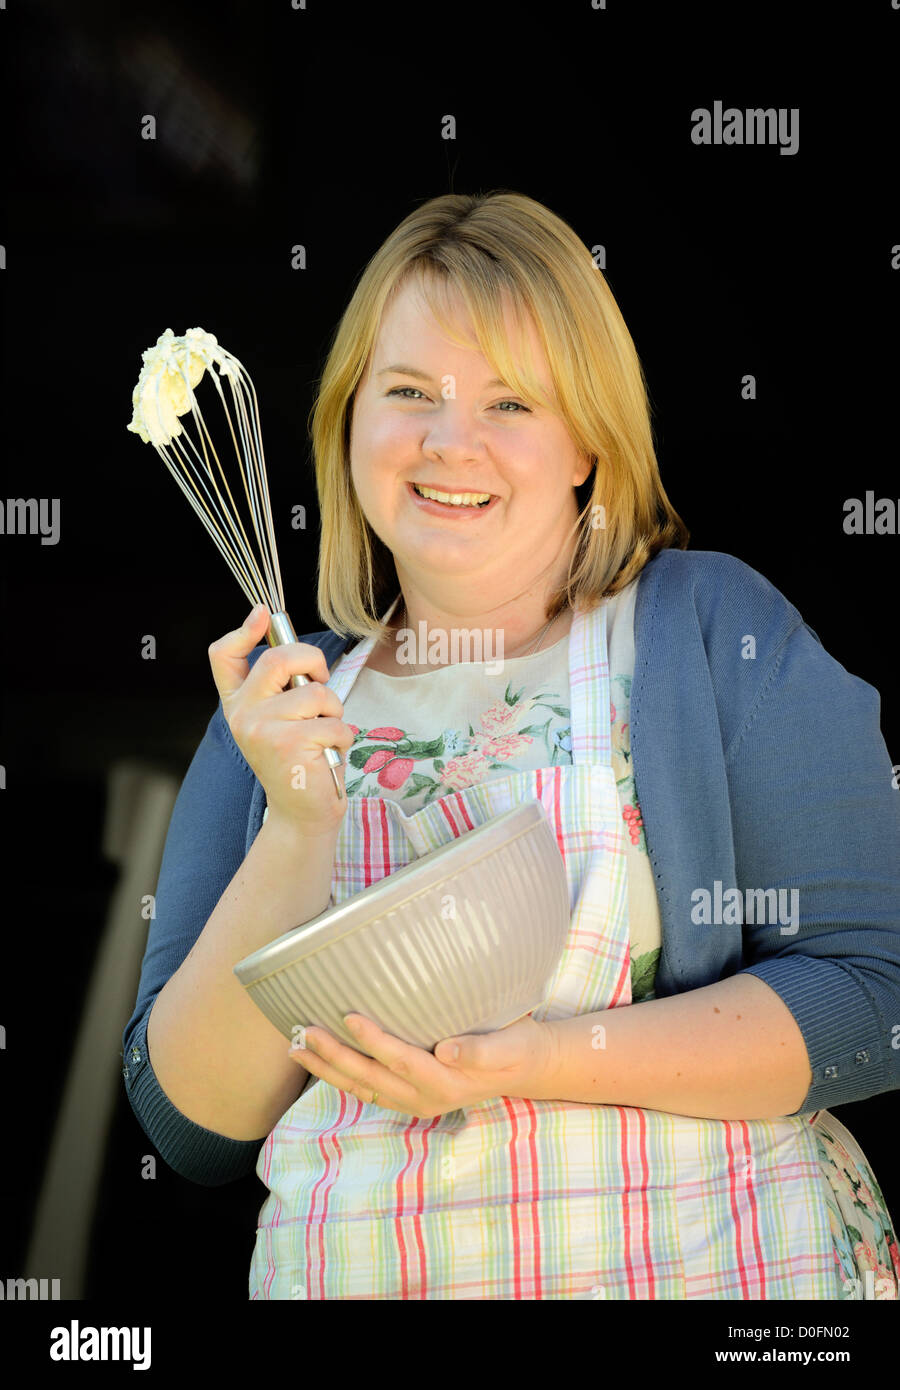 Contestant baker: Sarah-Jane Willis from West Sussex, UK who appeared in the latest series of the Great British Bake Off 2012. Stock Photo